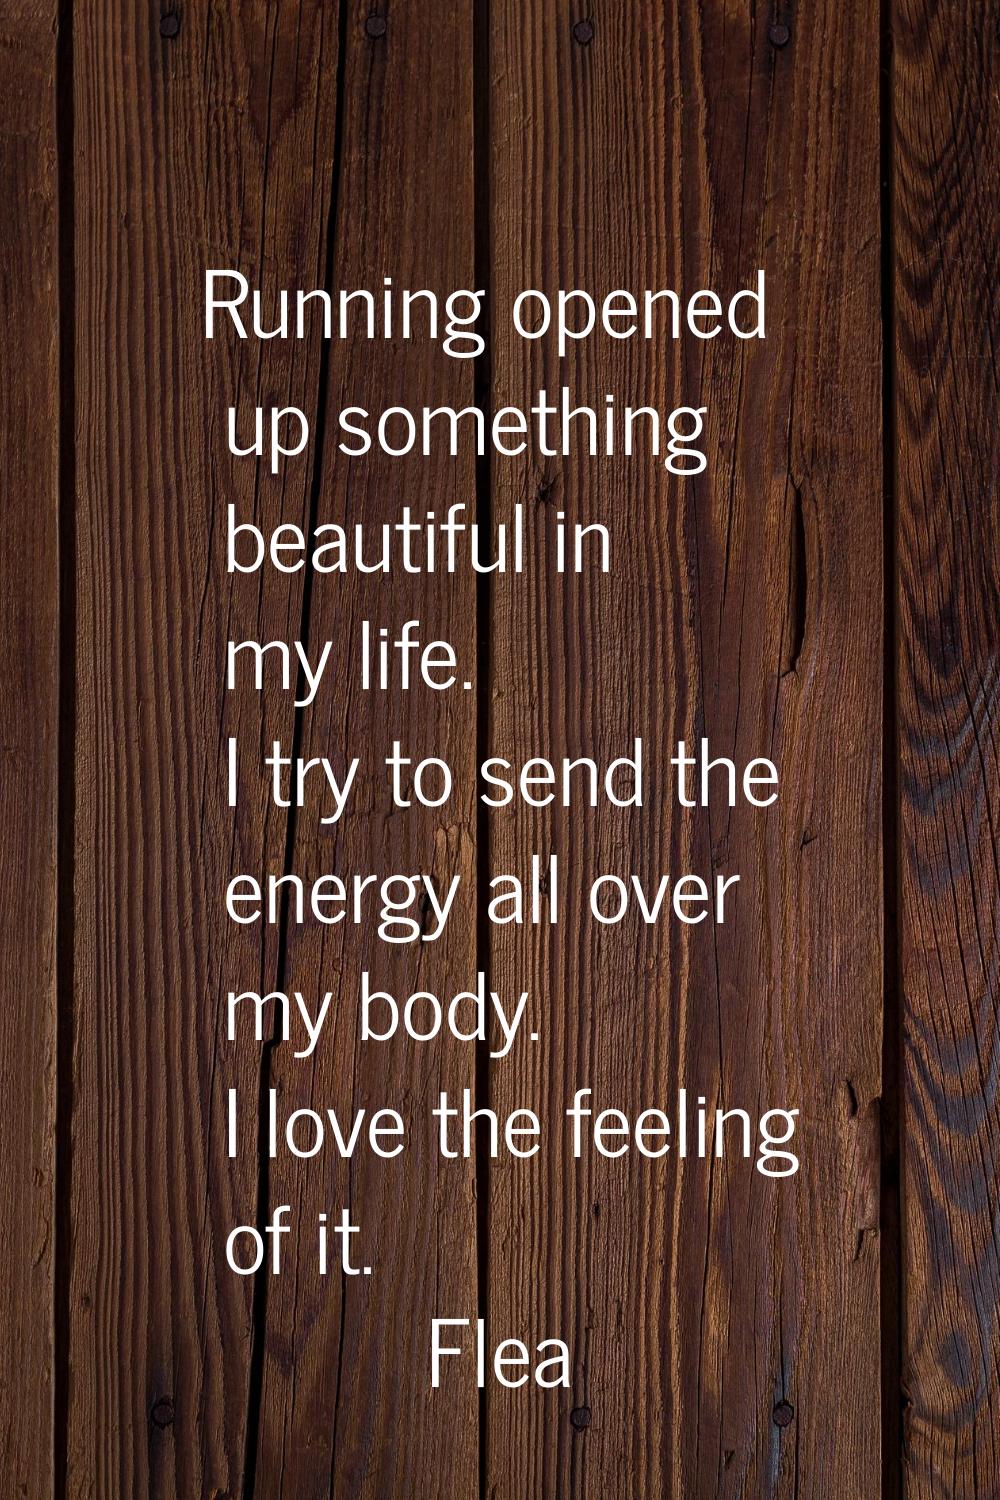 Running opened up something beautiful in my life. I try to send the energy all over my body. I love